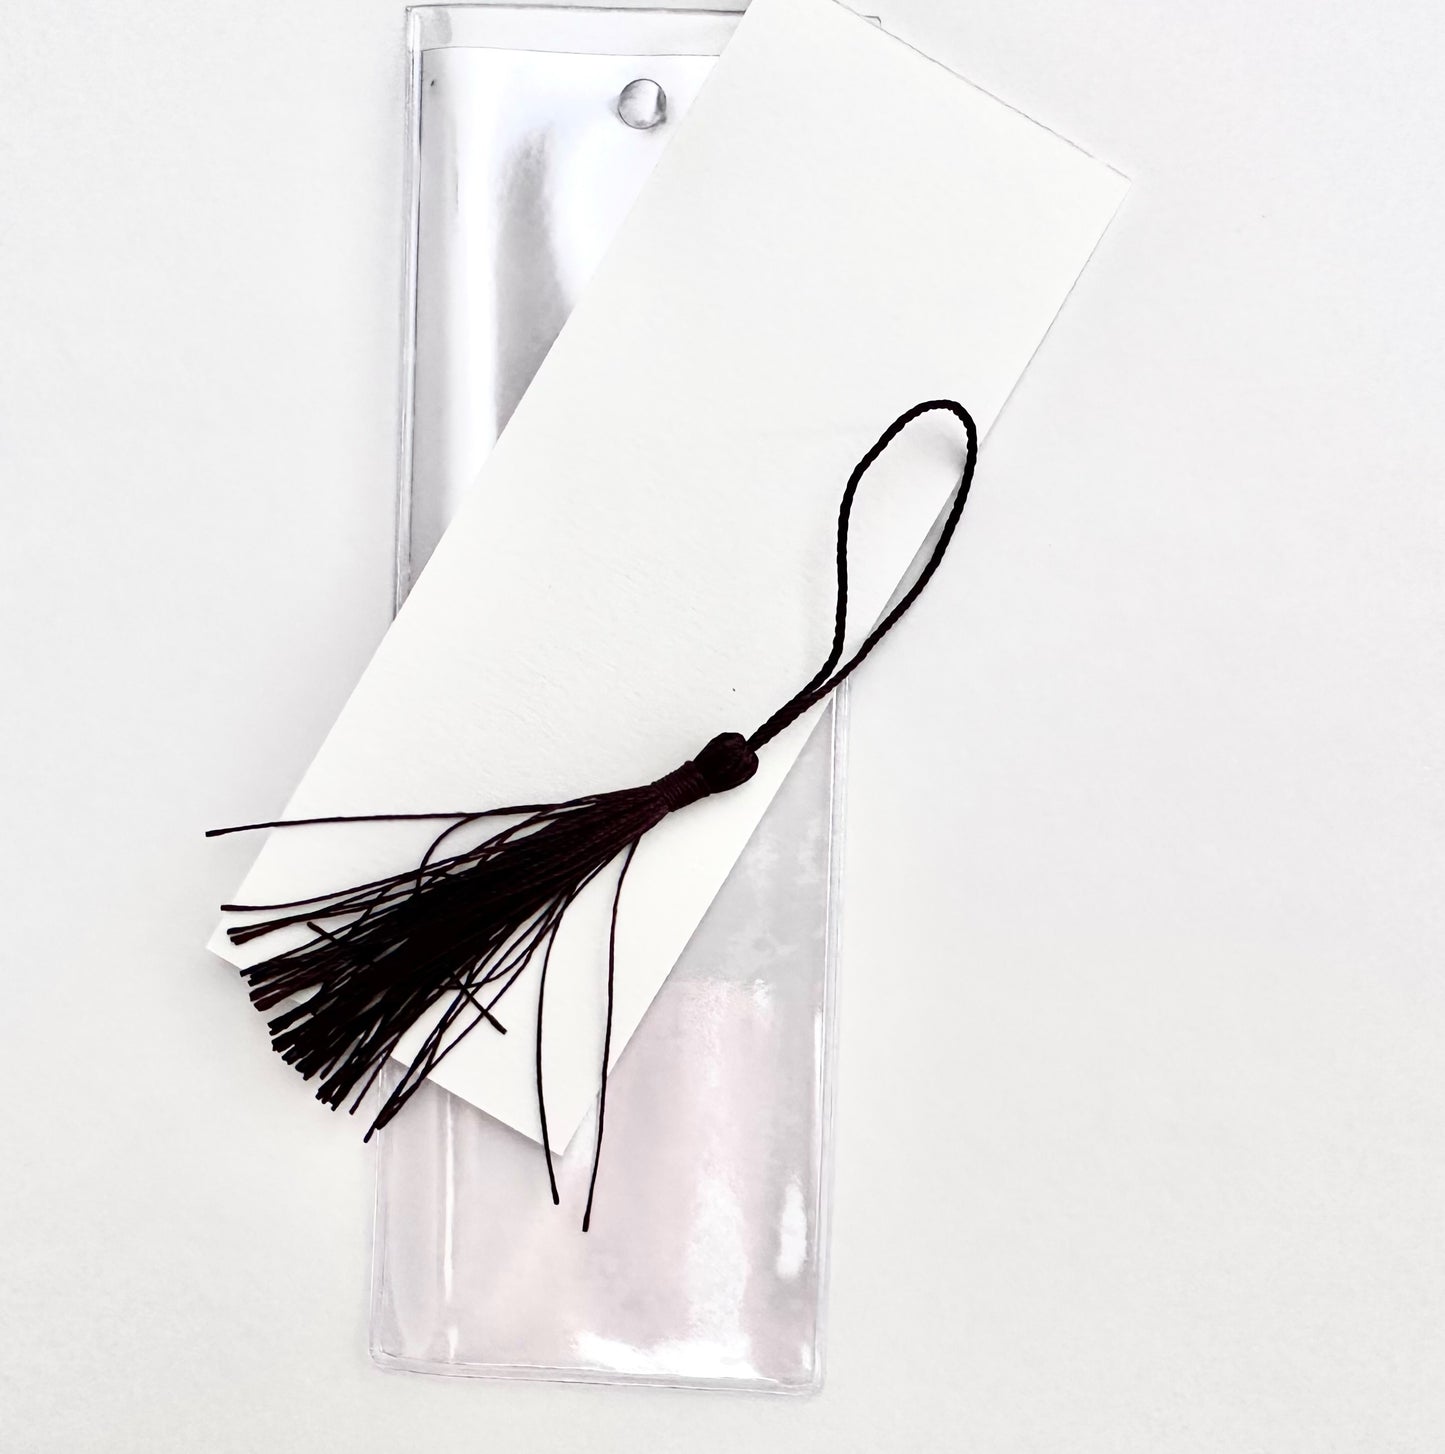 Blank Watercolor Bookmarks w/ tassels and sleeve